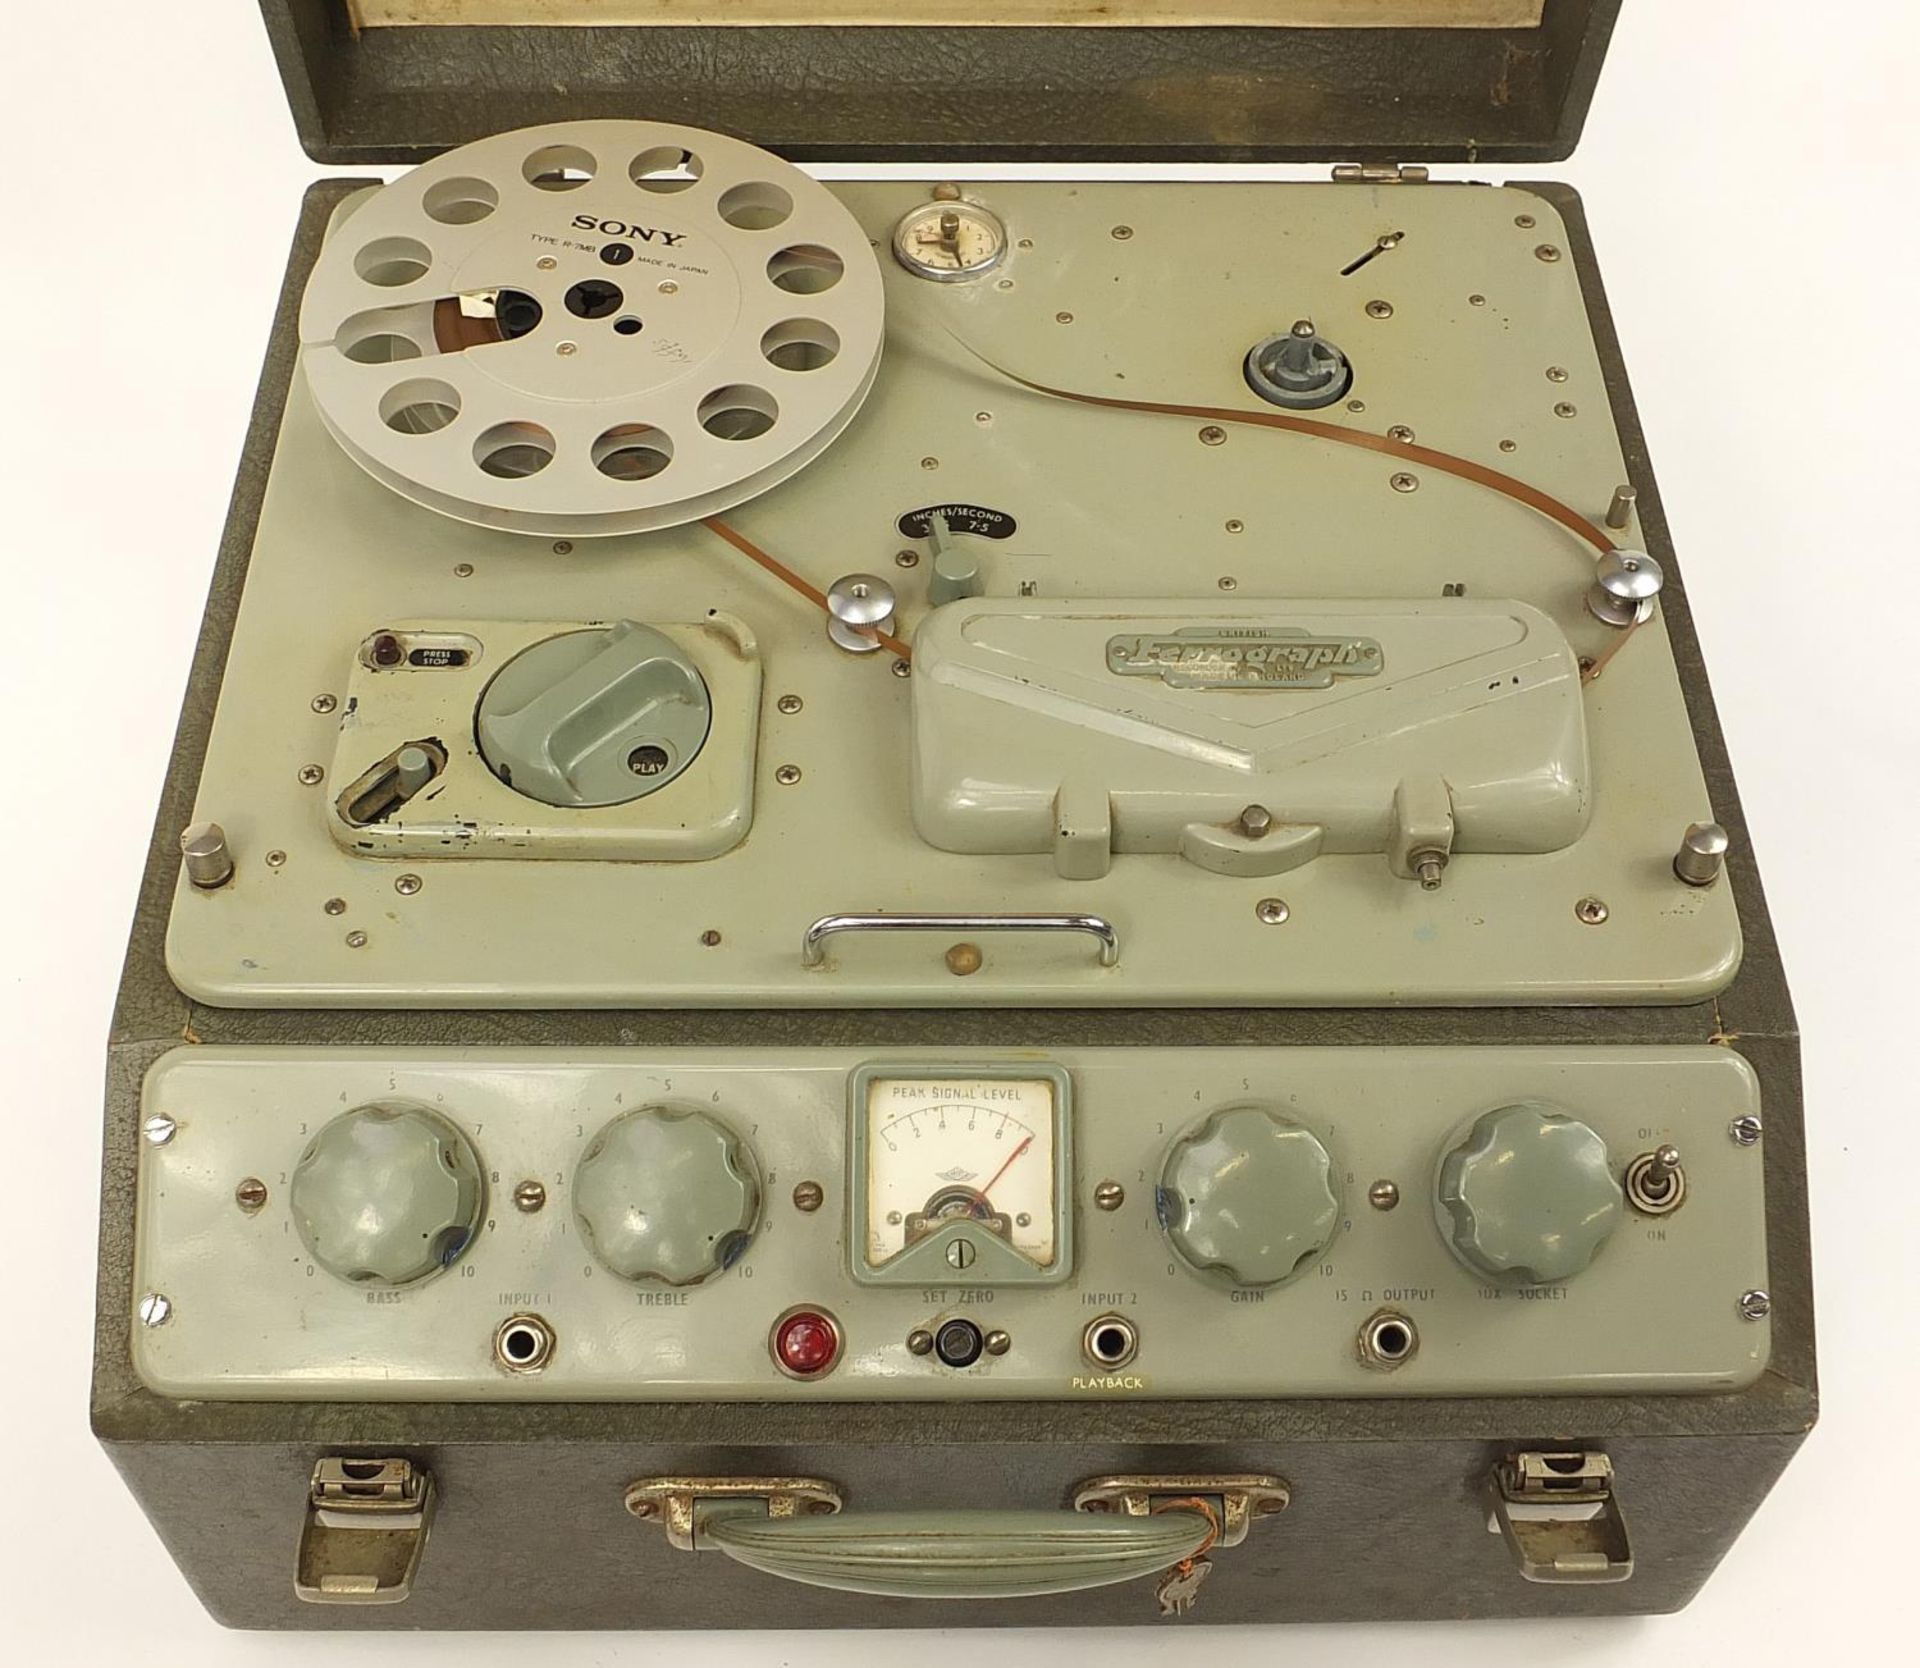 Vintage Ferrograph reel to reel tape recorder, 24.5cm H x 44cm W x 43.5cm deep when closed - Image 2 of 7